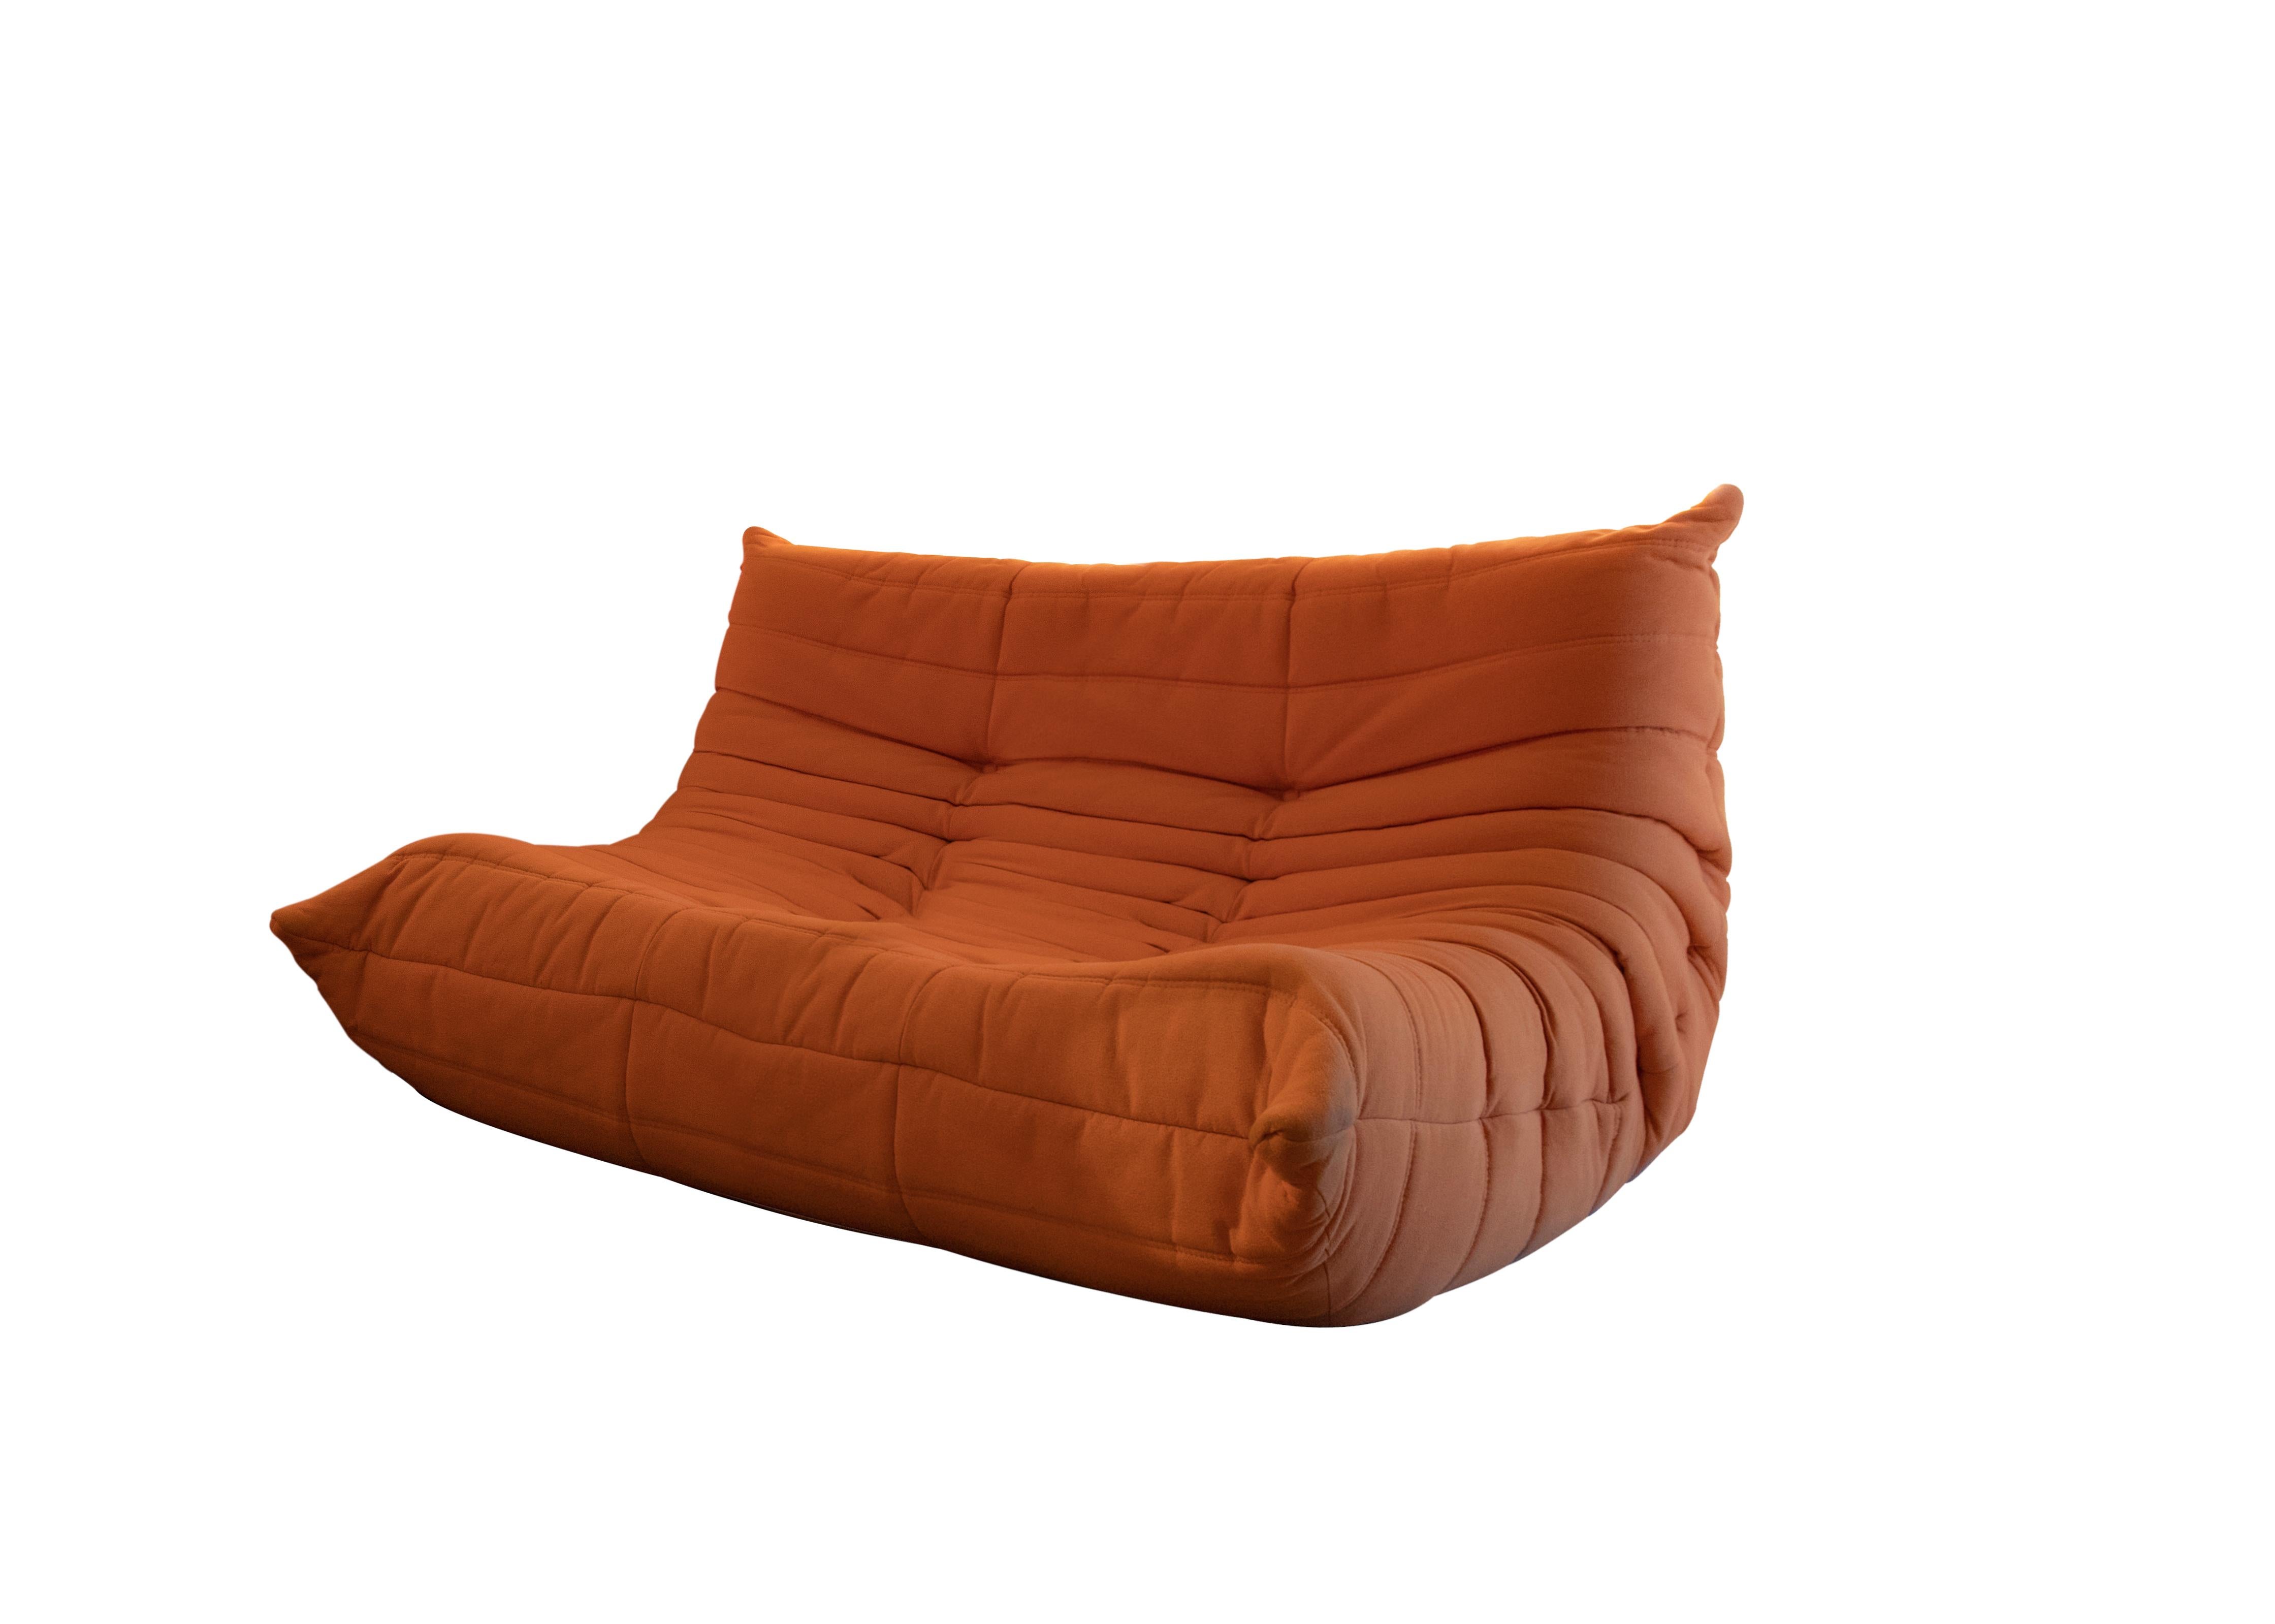 Togo sofa is a midcentury design sofa set designed by Michel Ducaroy for Ligne Roset, in the 1970s

The set consist in four orange colored all-foam cushion seating.

Very good conditions.

Very rare iconic sofa of great success and popularity,